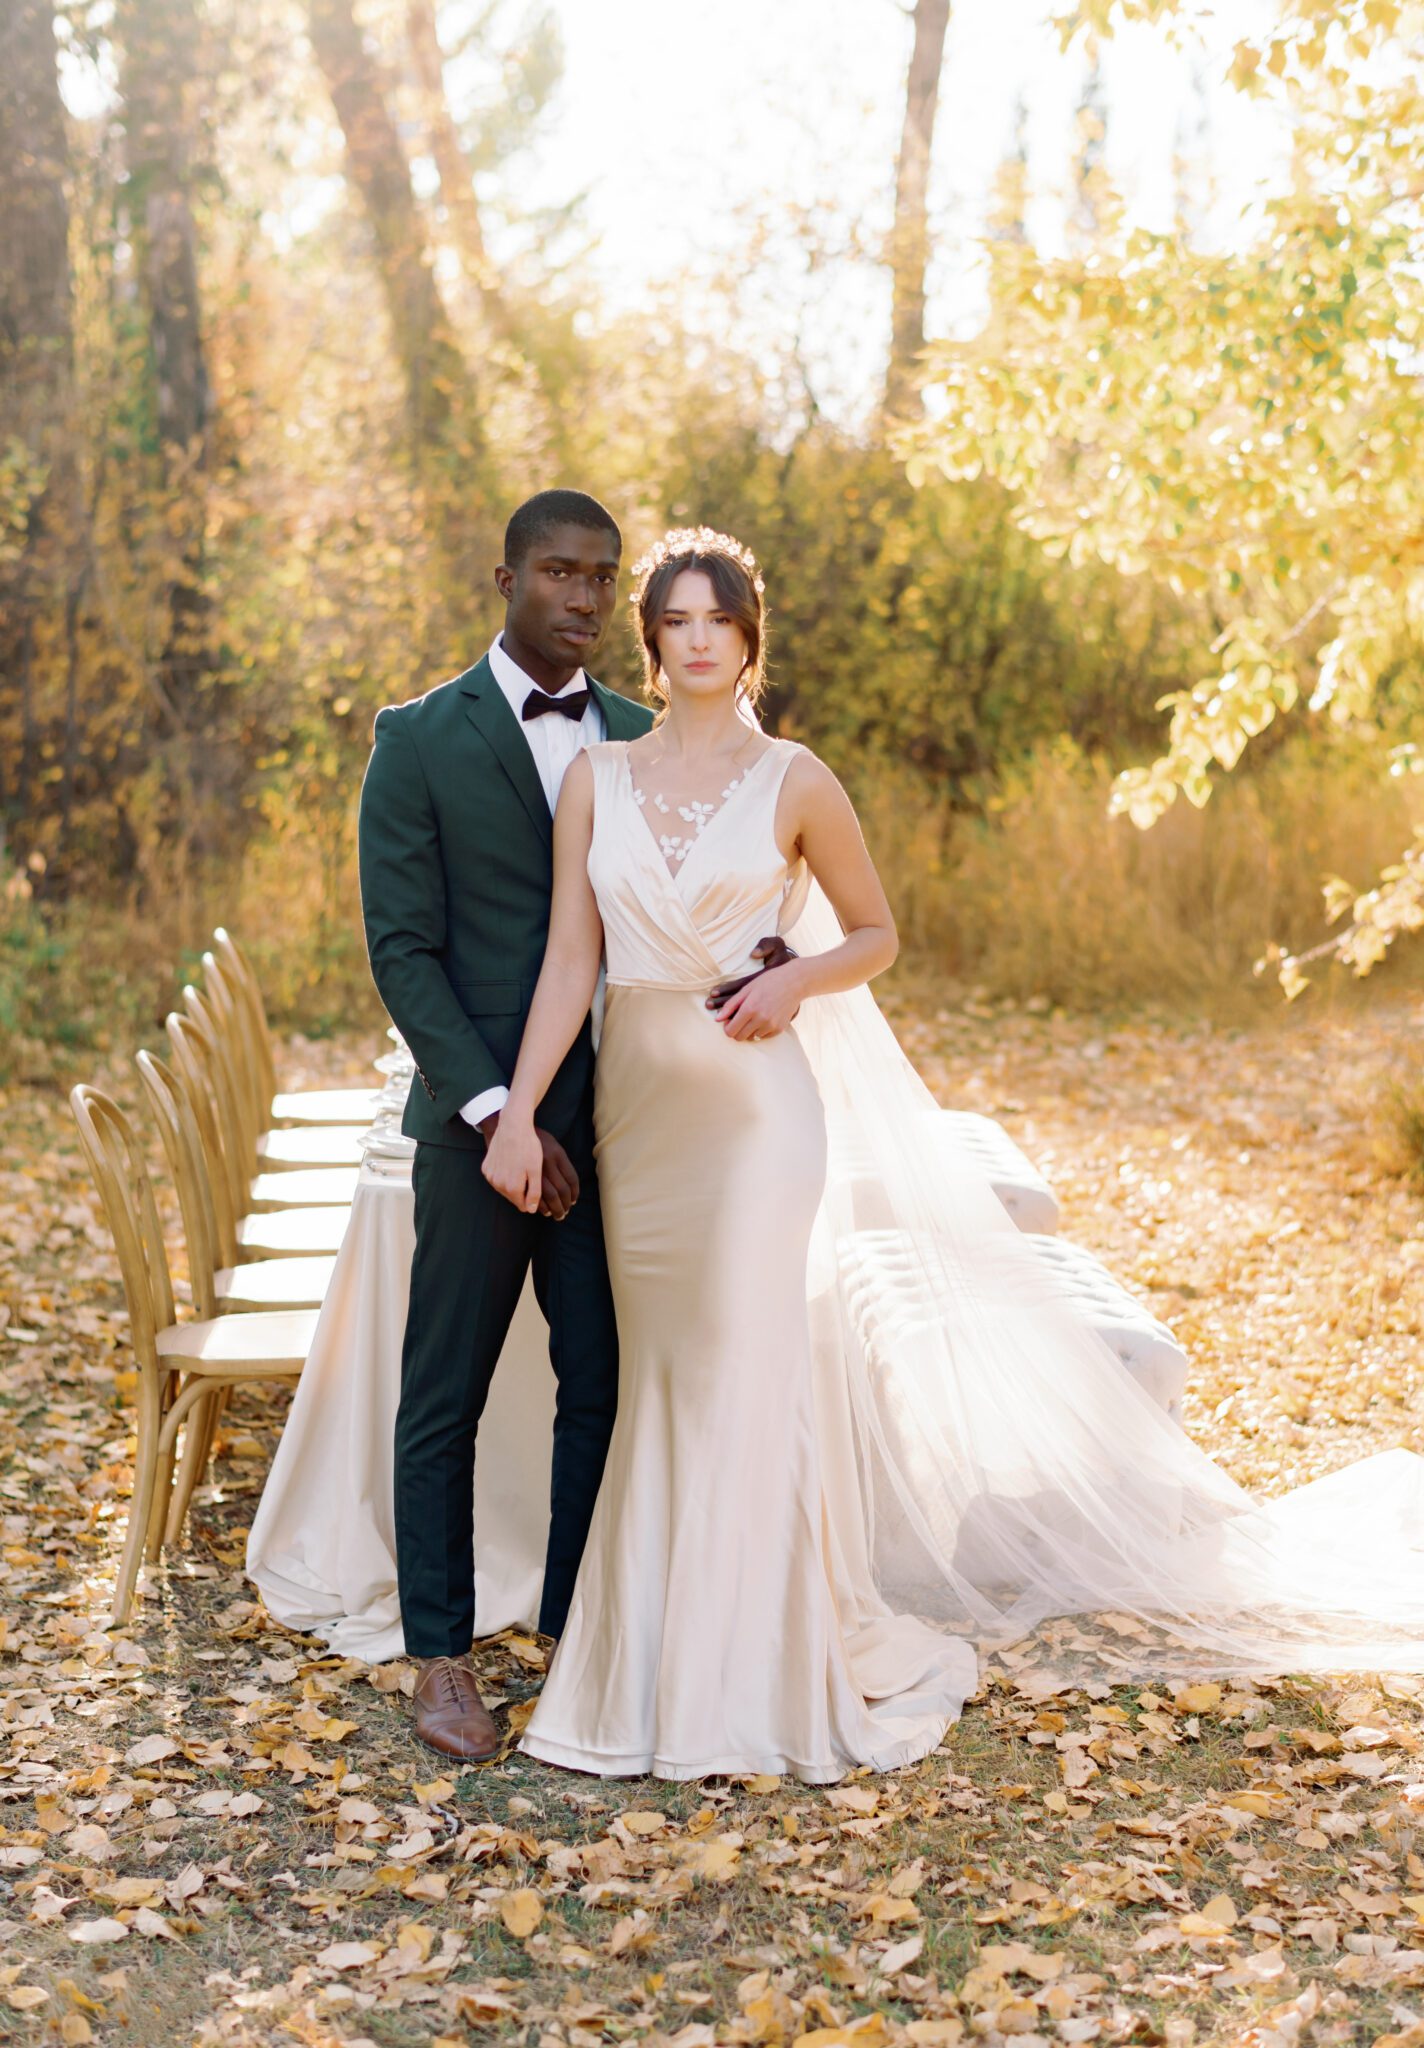 Fine art wedding photography by Kaity Body. Fall inspired wedding featuring emerald green suit and satin bridal gown with lace detail. 